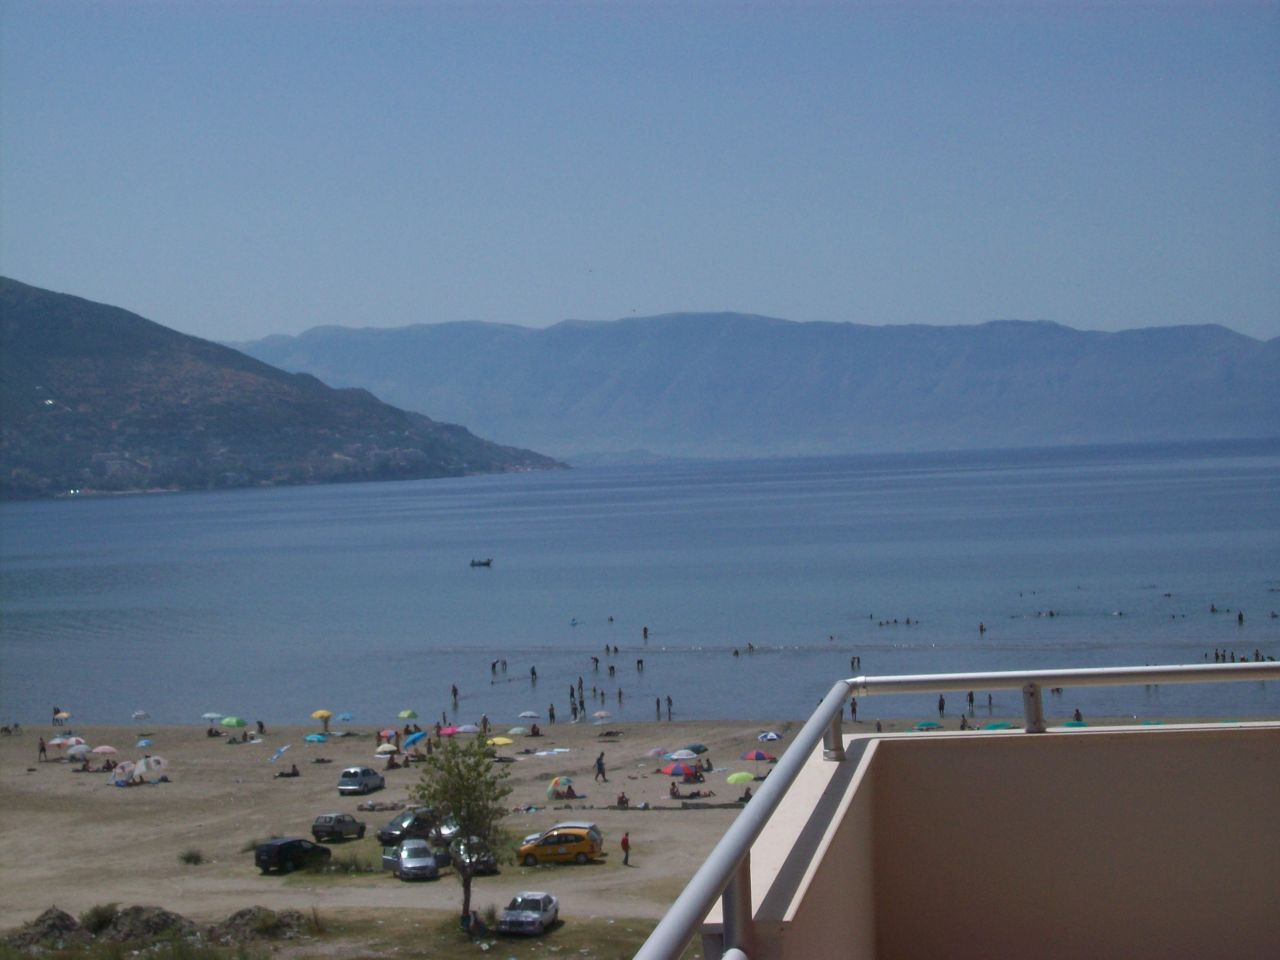 Property for sale in Albania, Low price